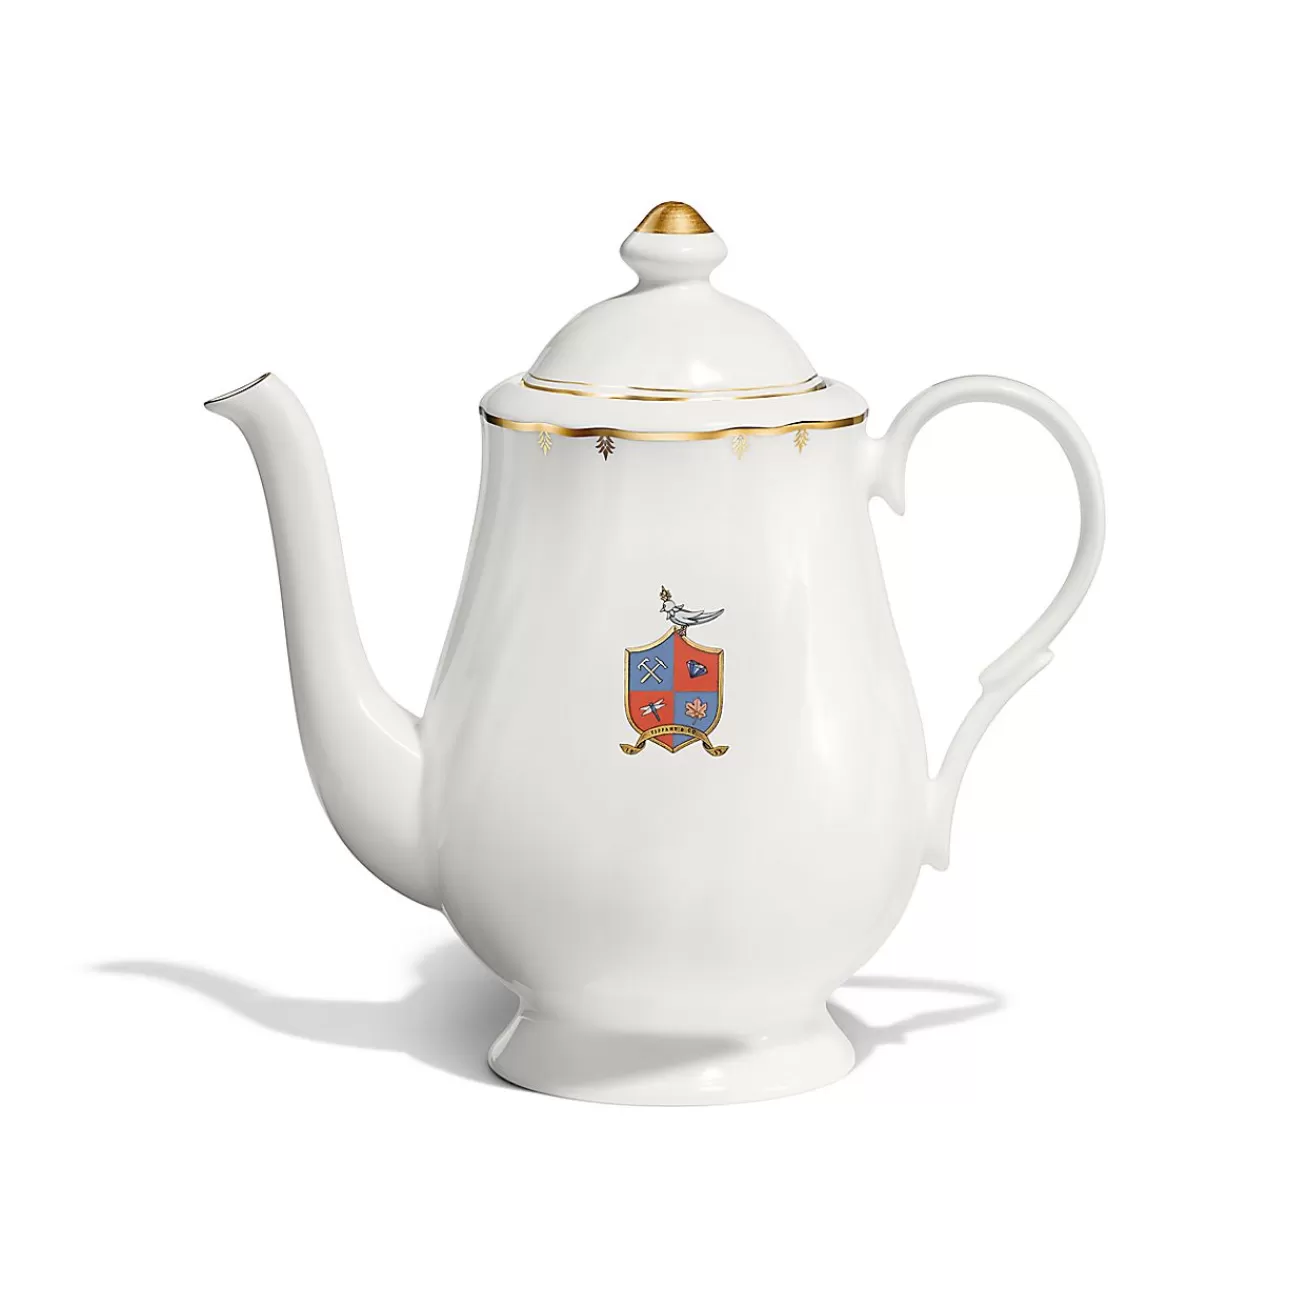 Tiffany & Co. Tiffany Crest Teapot in Bone China | ^ The Home | Housewarming Gifts